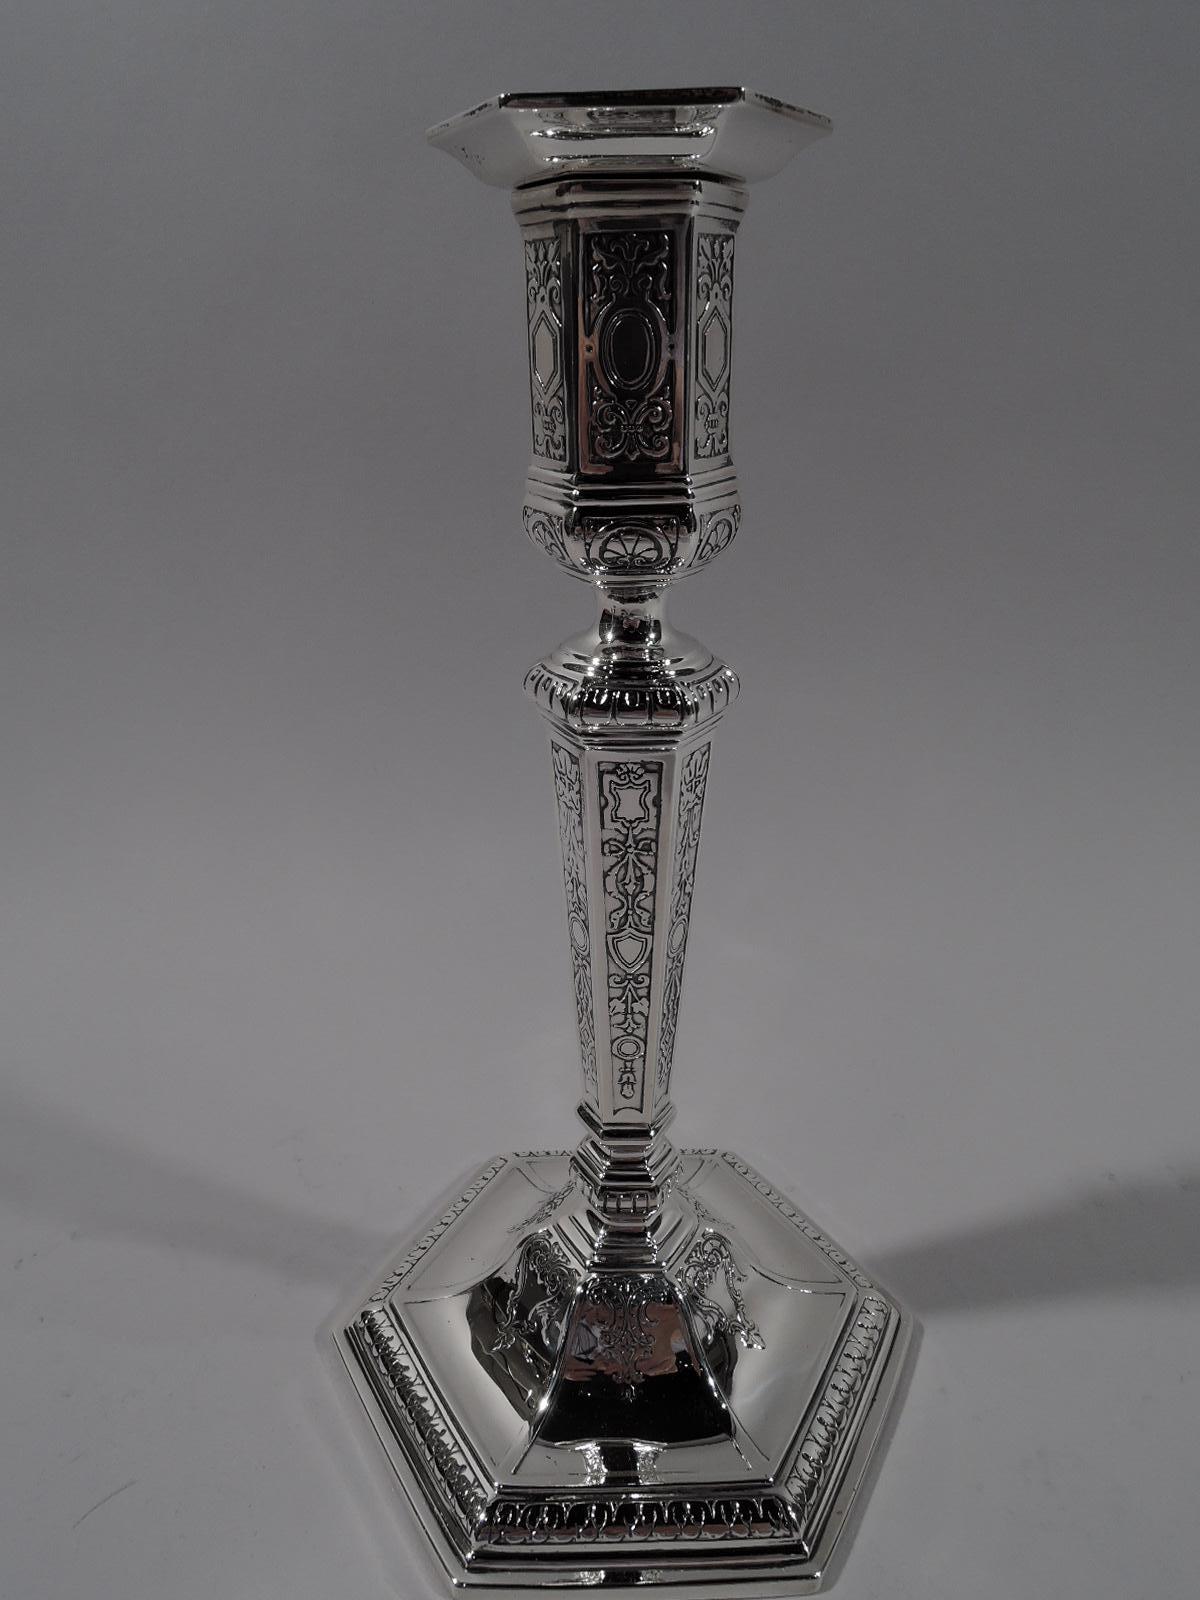 Pair of Edwardian sterling silver candlesticks. Made by Tiffany & Co. in New York, circa 1915. Each: Tapering shaft on raised foot. Socket has straight sides and detachable bobeche. Faceted. Acid-etched flowers, ribbon, and paterae. Leaf-and-dart